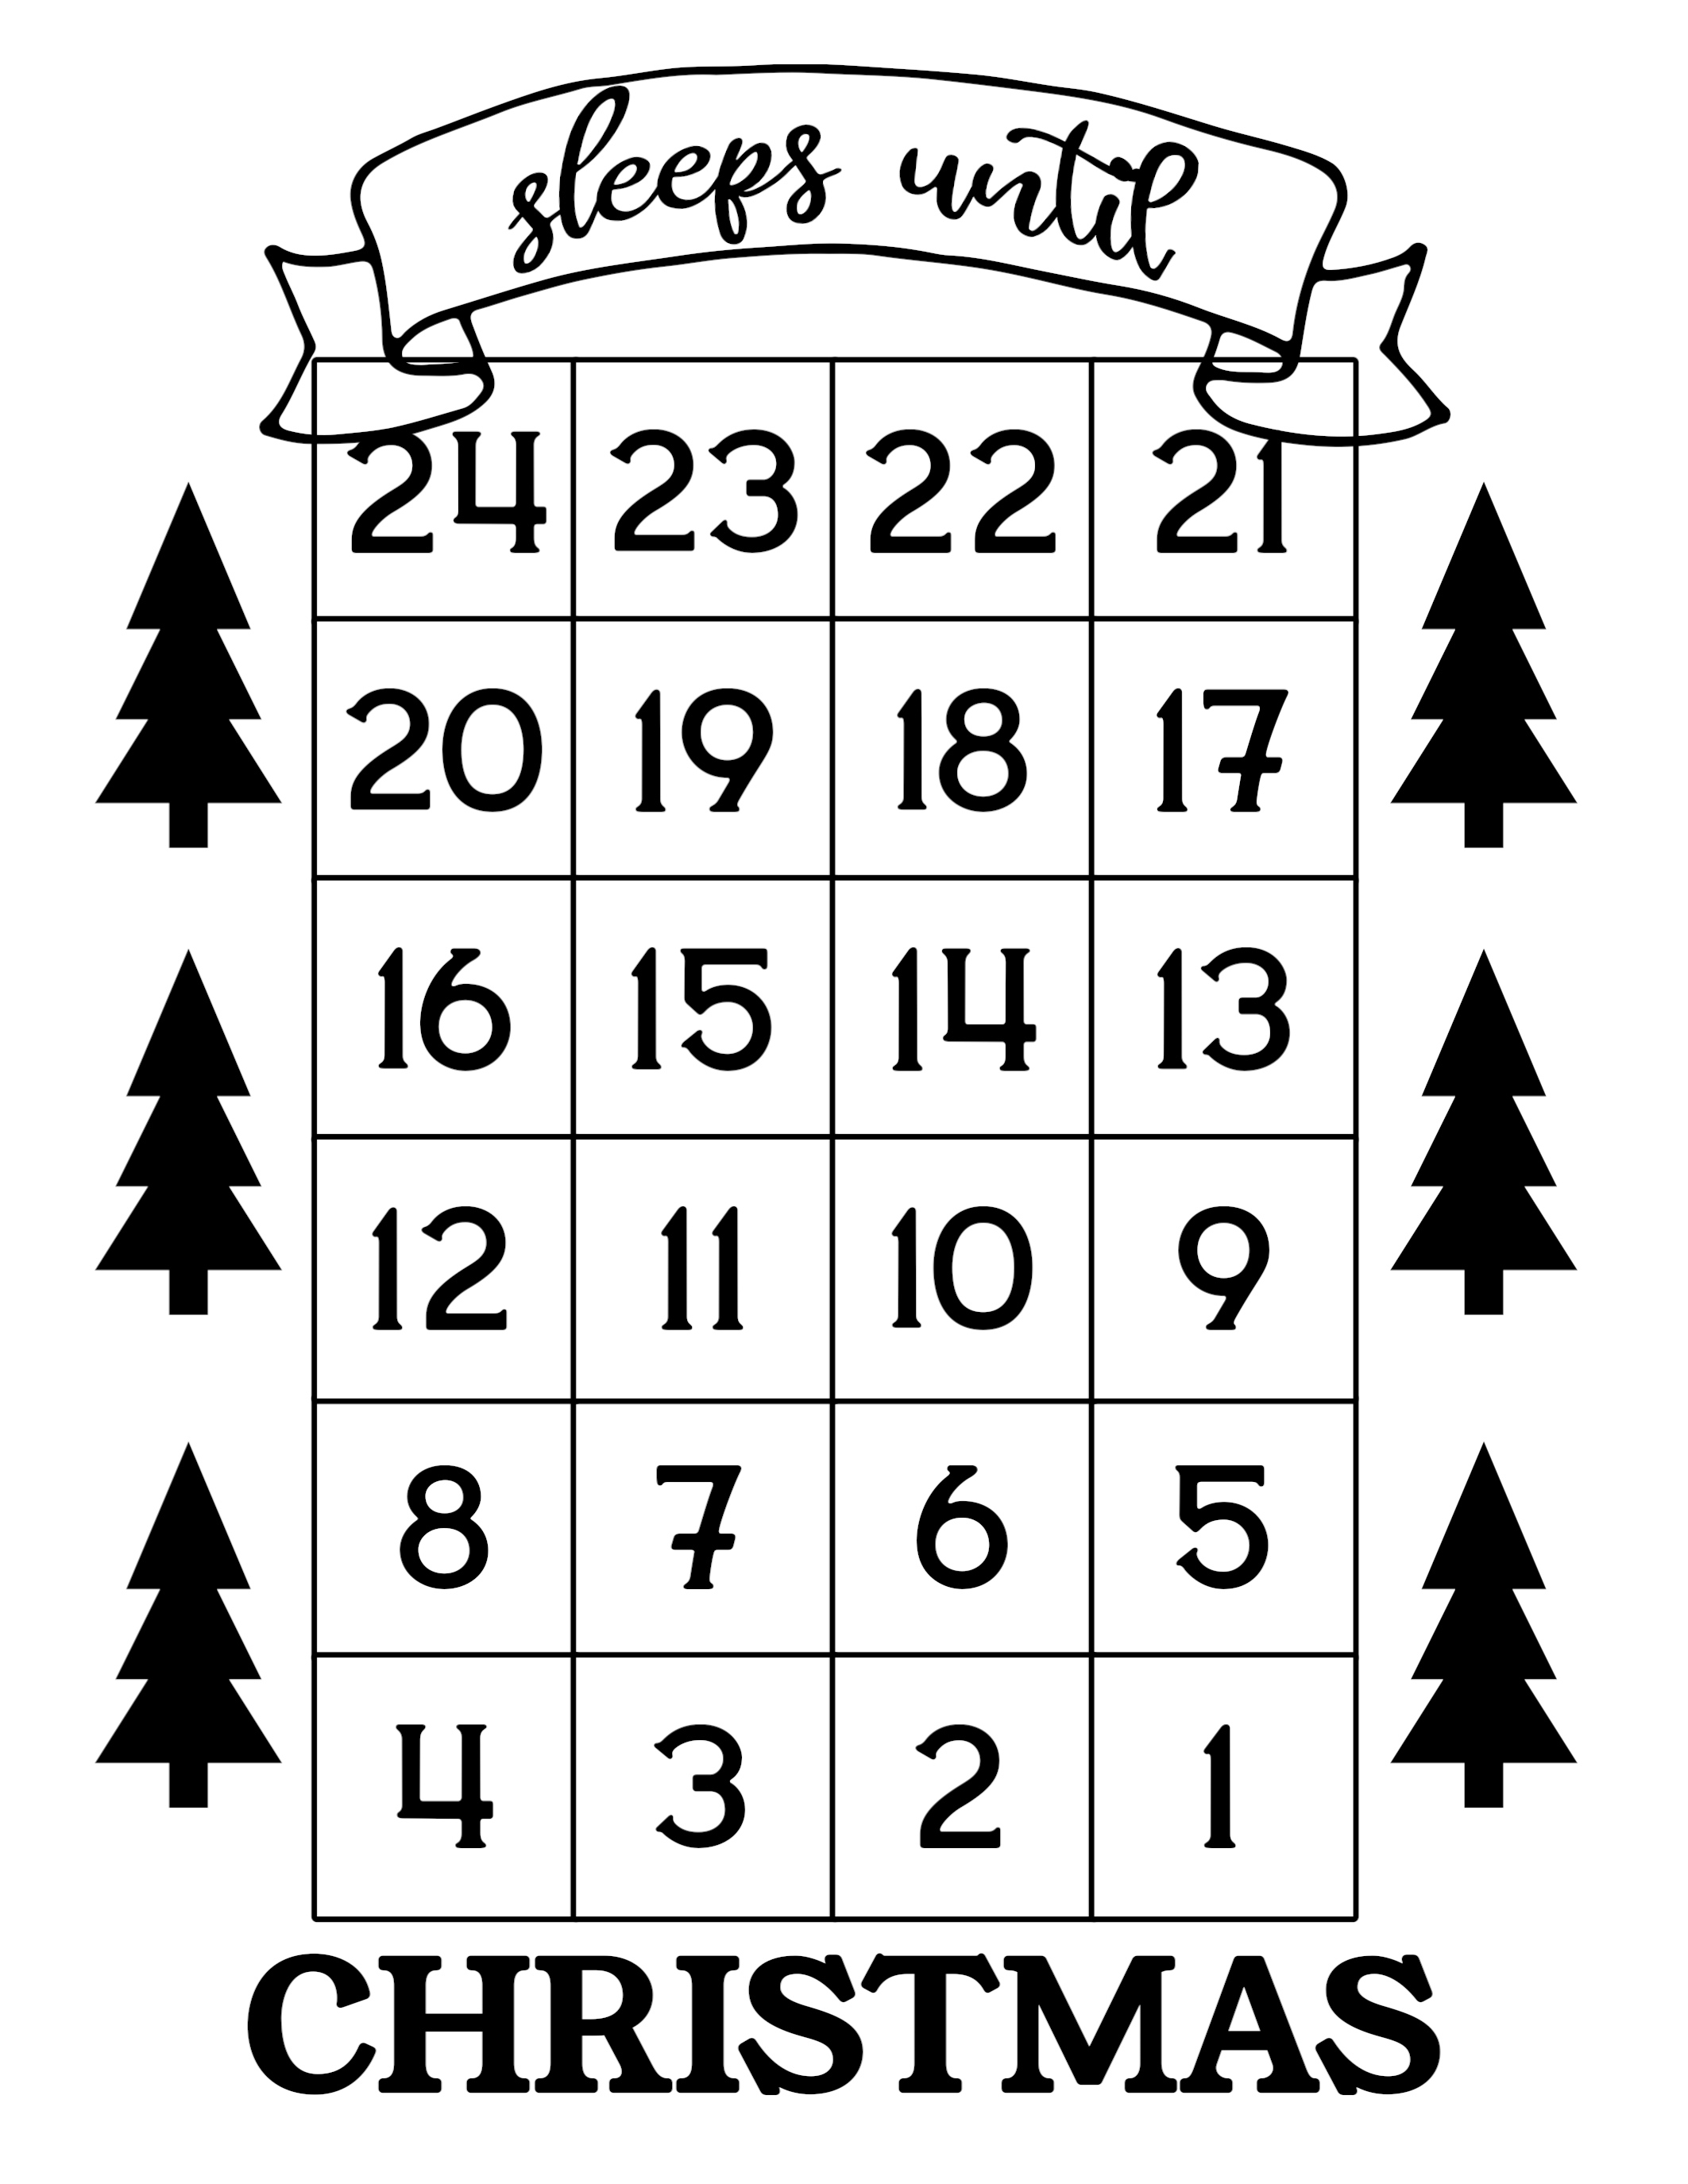 How Many Days Until Christmas Free Printable - Paper Trail Exceptional Free Printable Countdown Calendar Days